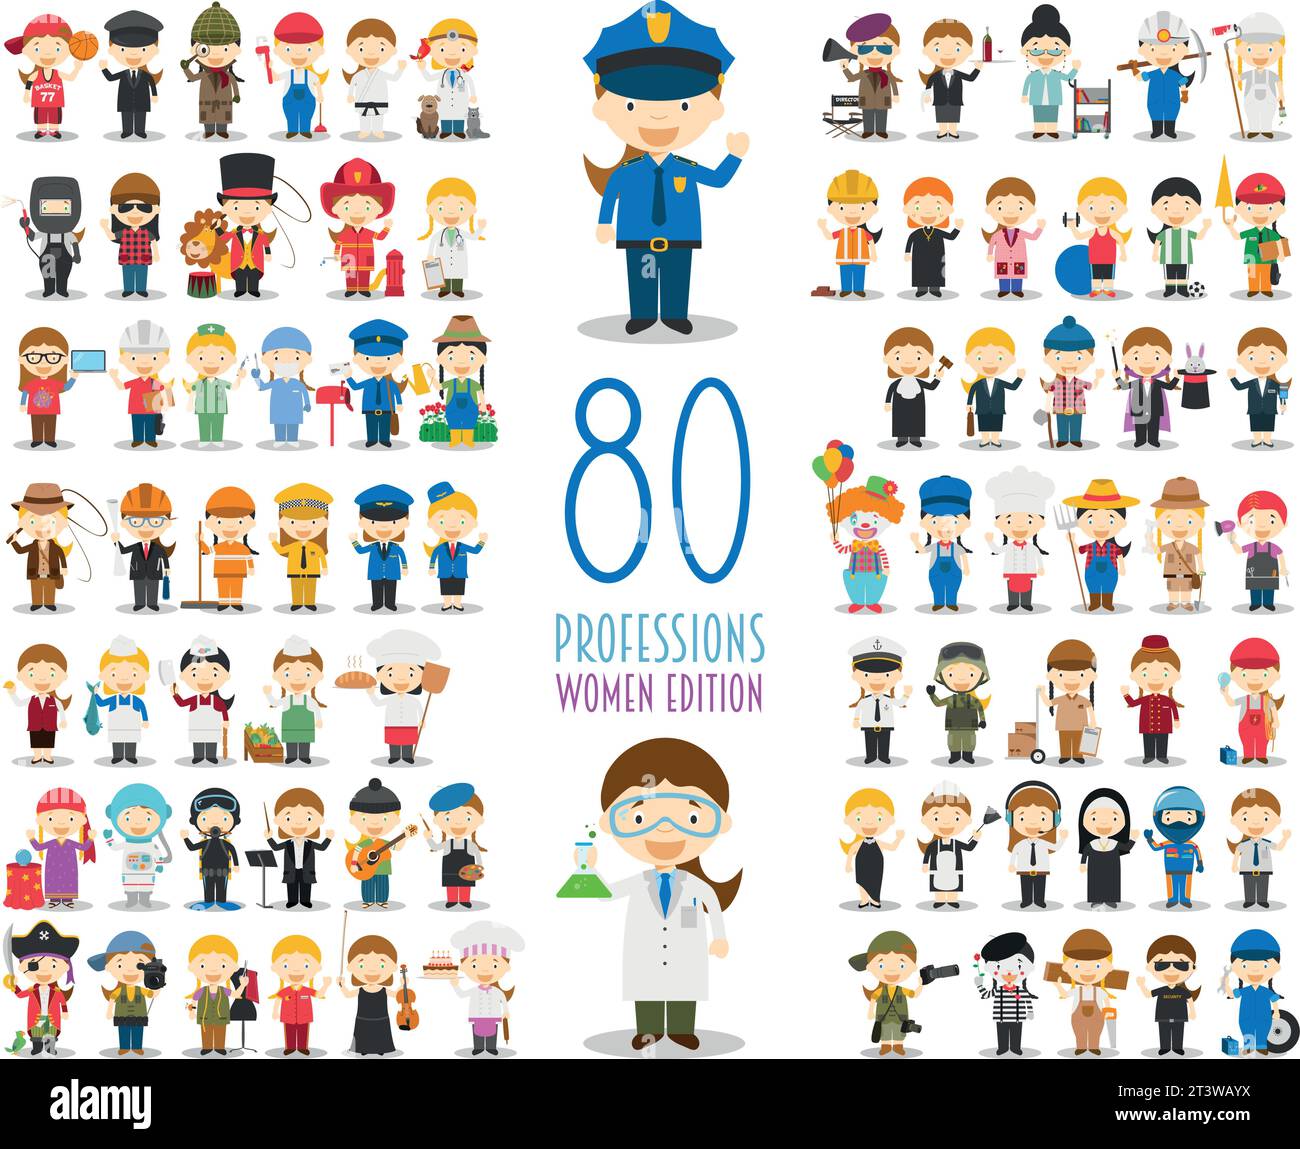 Kids Vector Characters Collection: Set of 80 different professions in cartoon style. Women Edition. Stock Vector